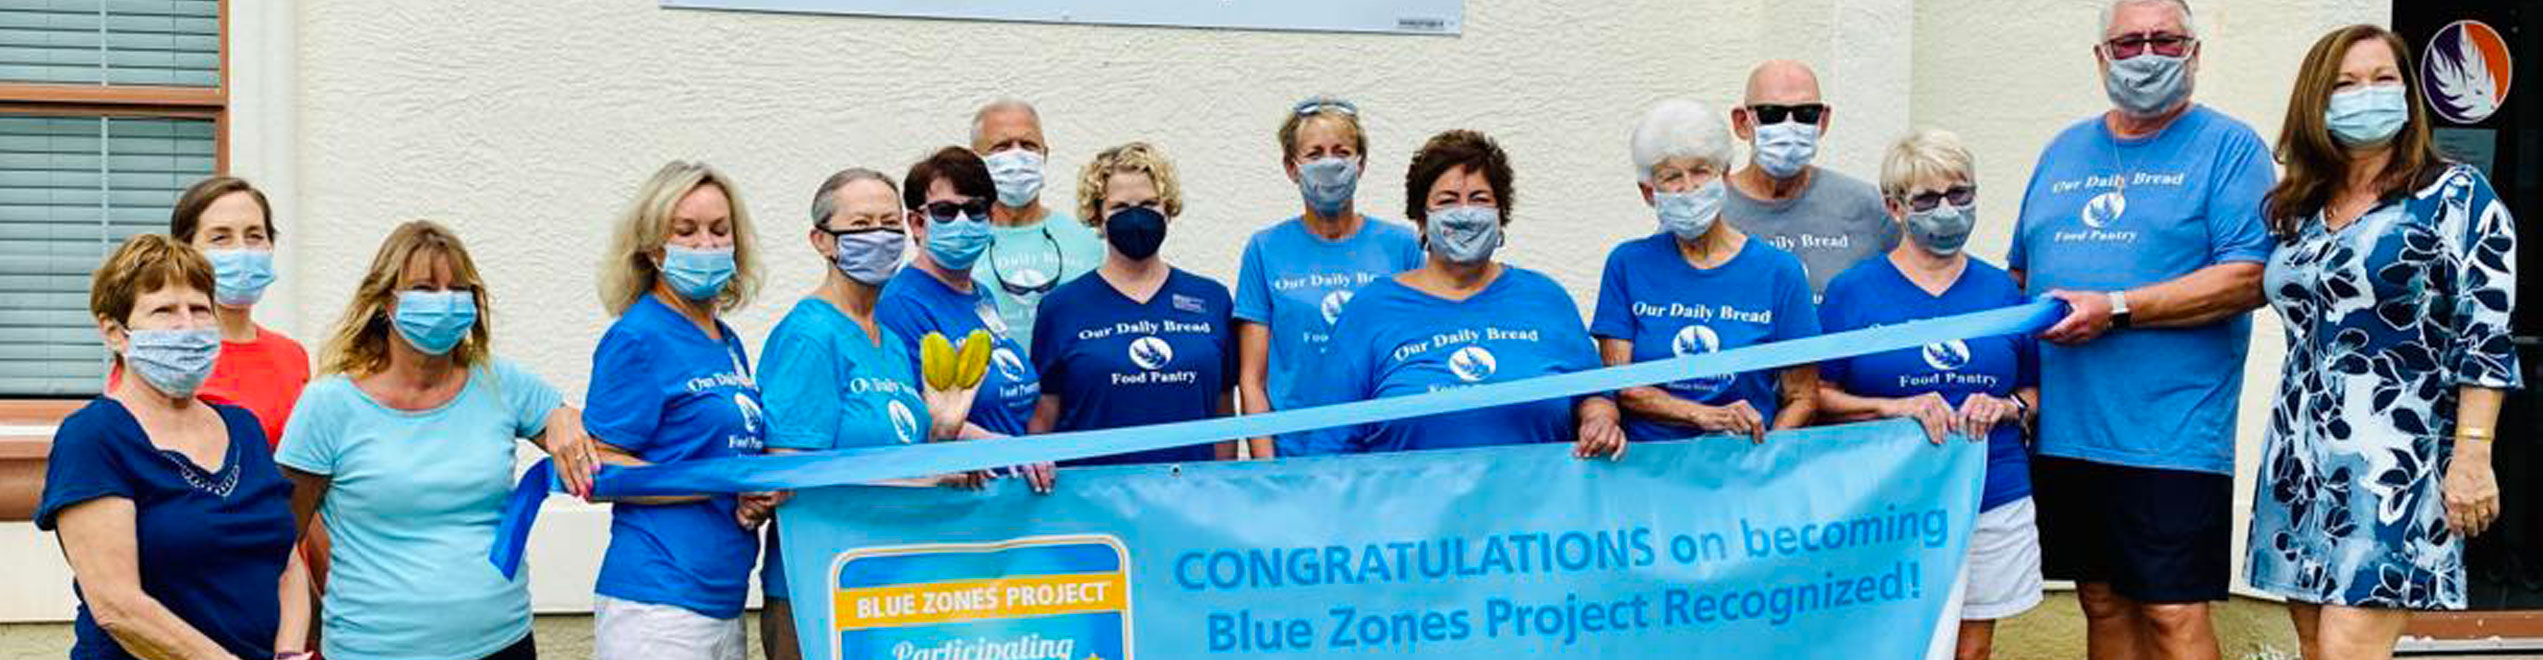 Our Daily Bread Food Pantry newest member of Blue Zones project